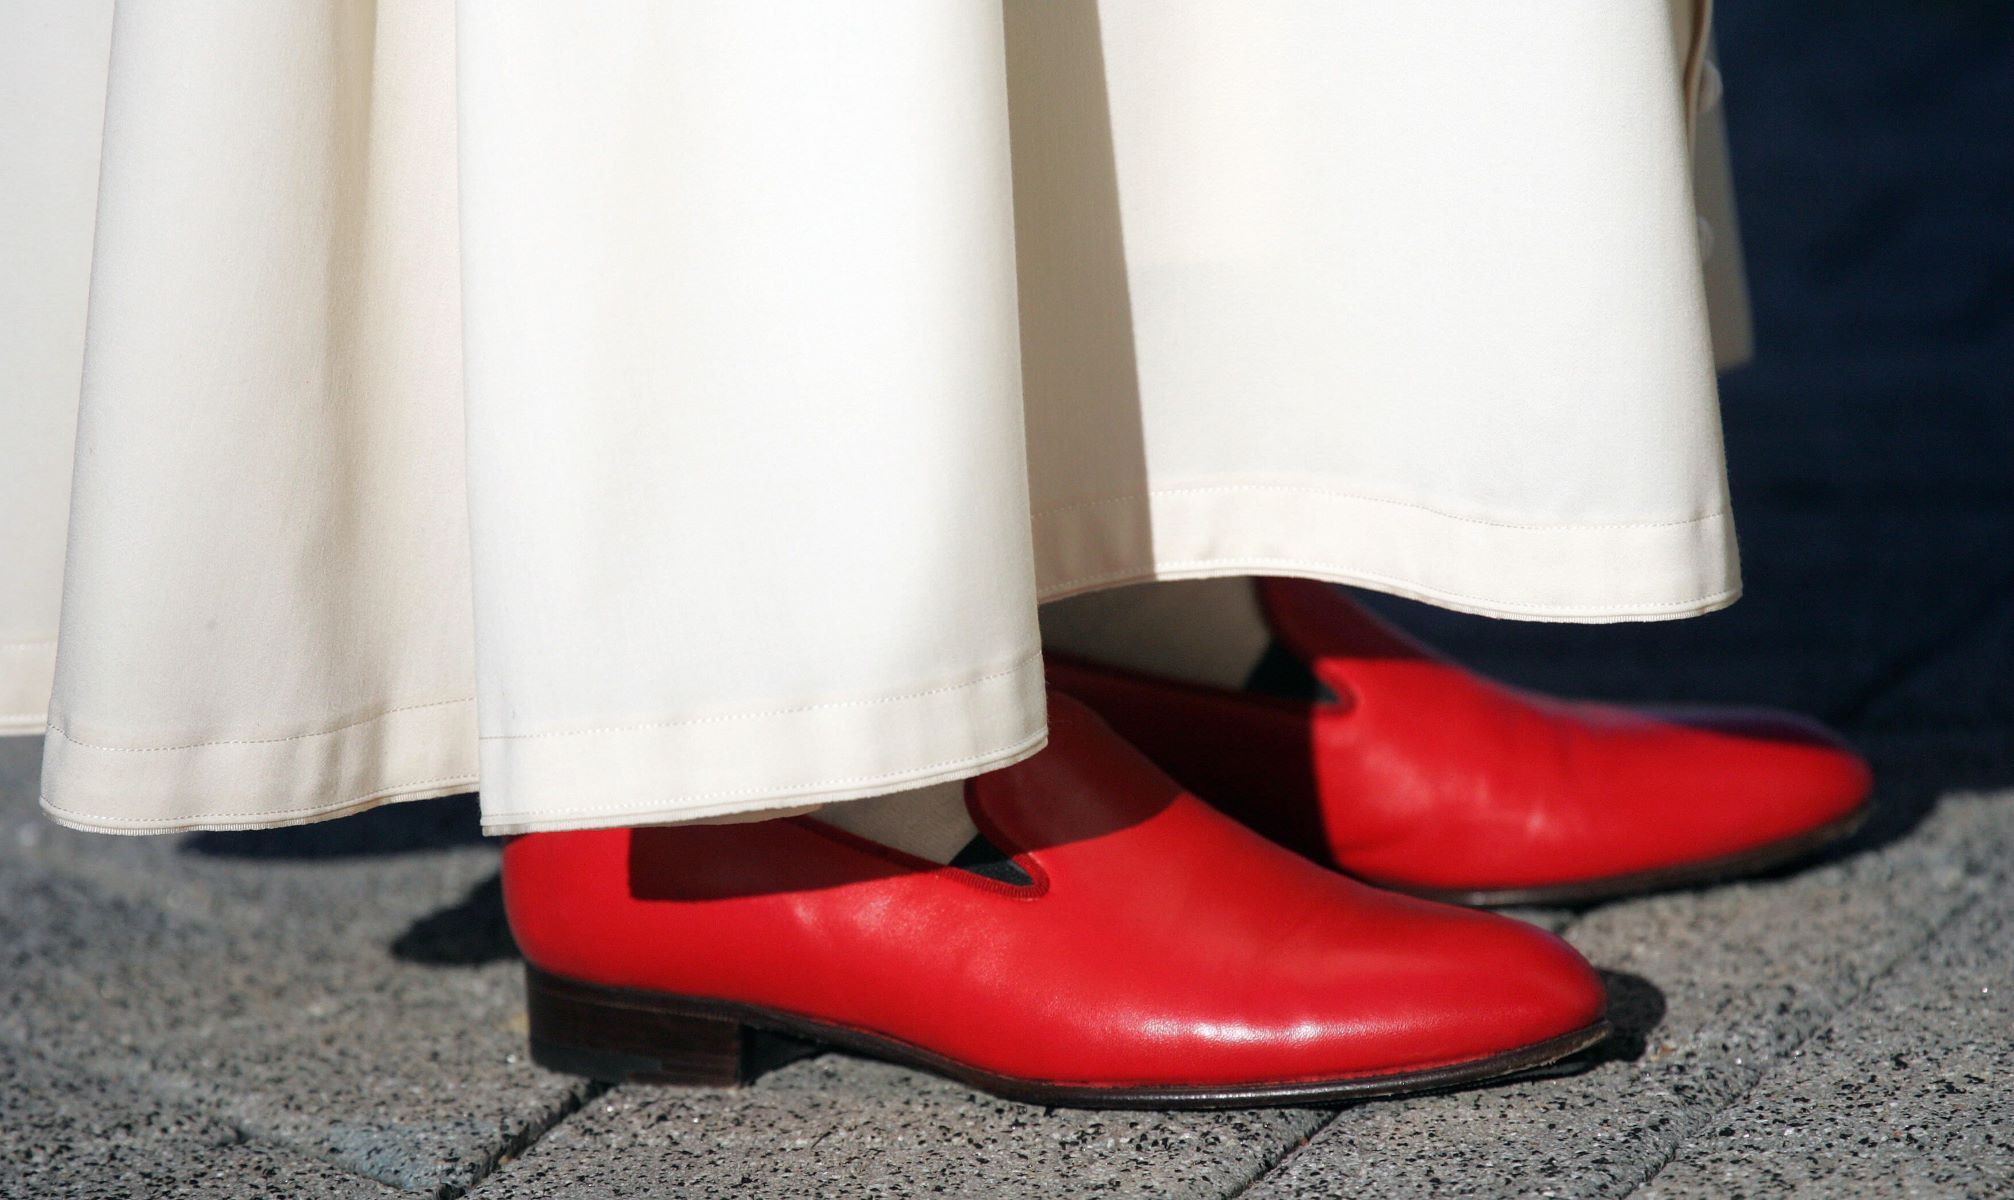 The Ultimate Guide To Wearing Red Shoes At A Wedding